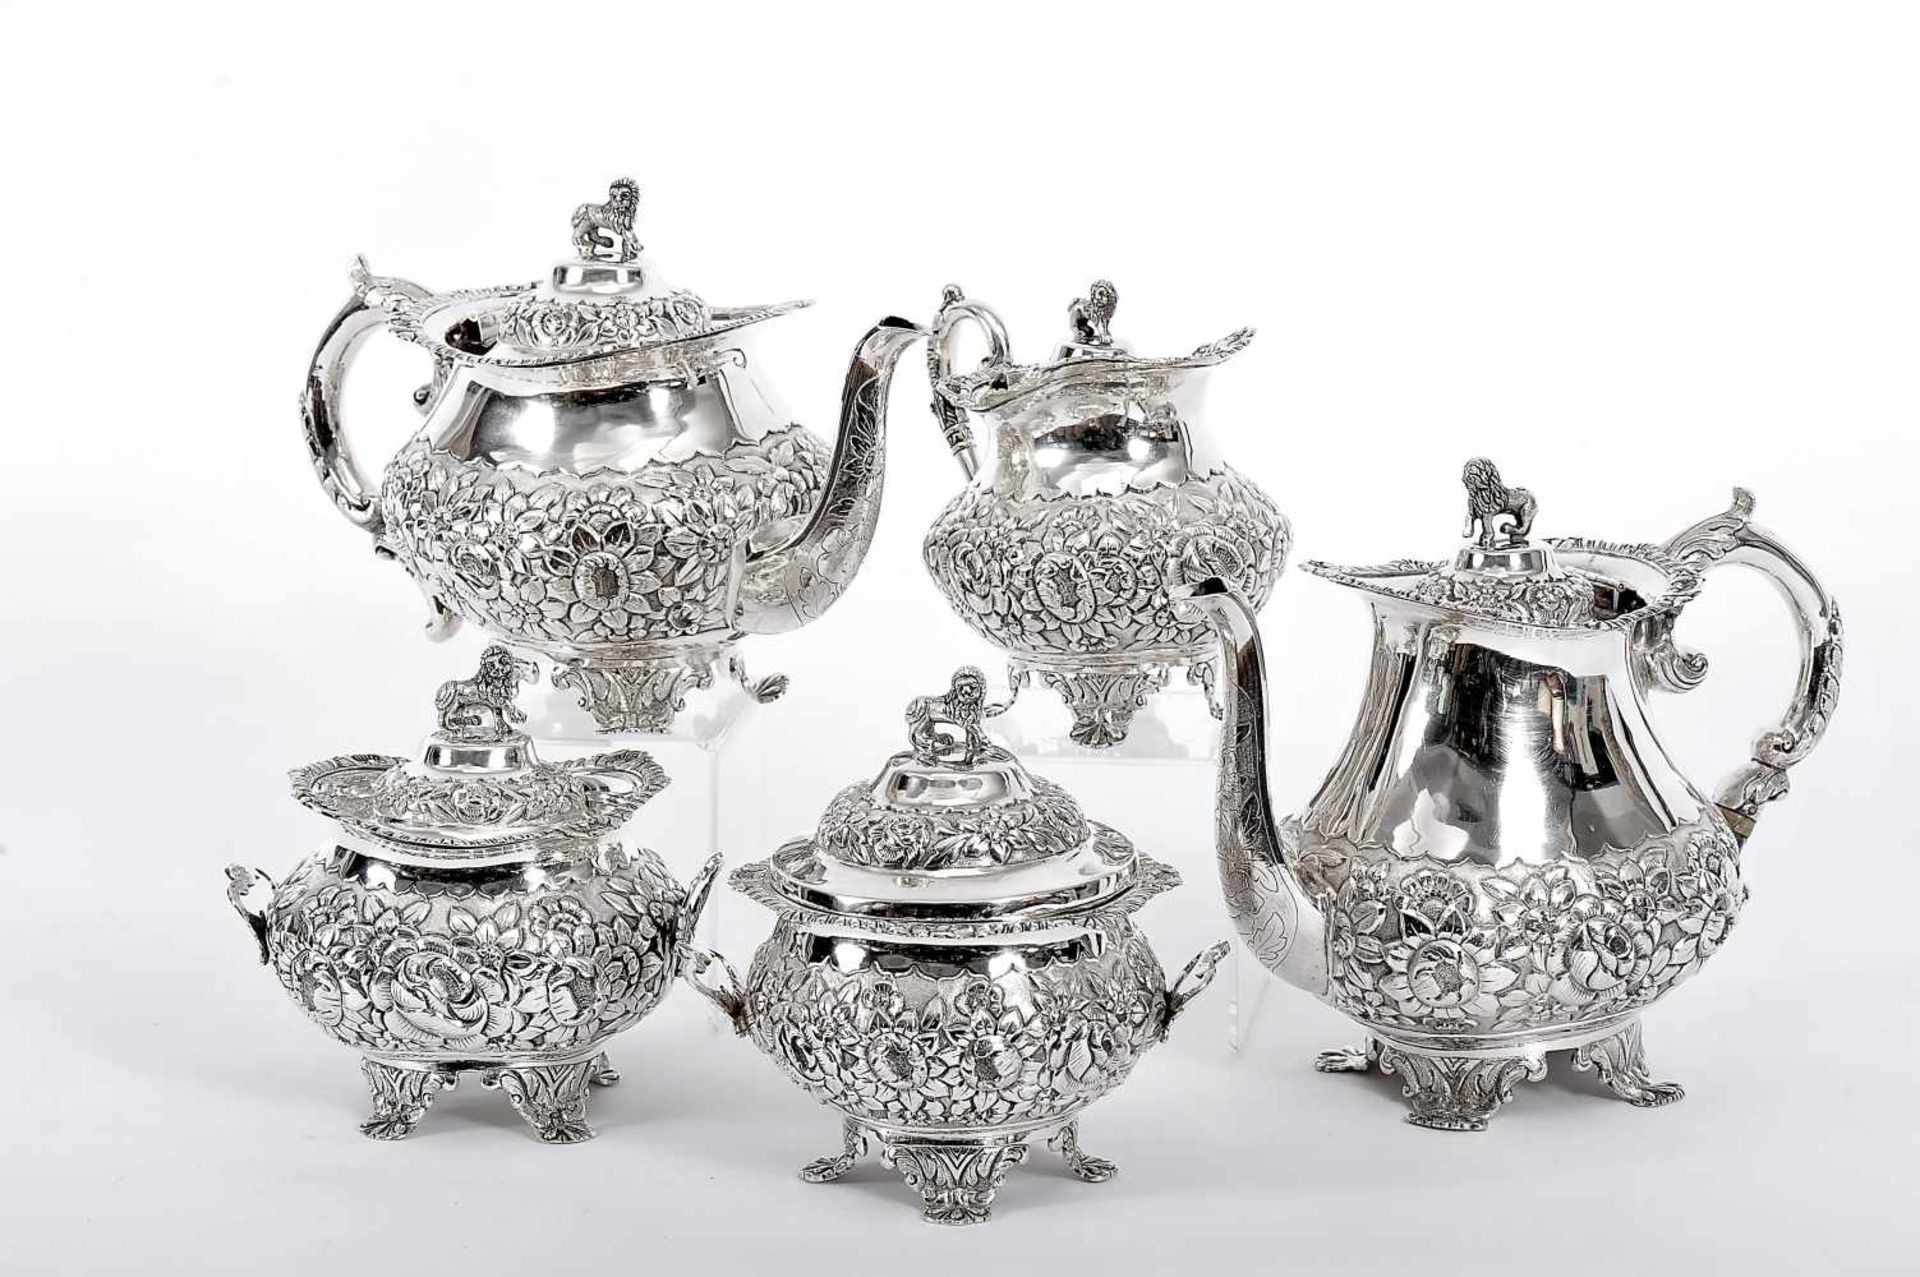 A Tea and Coffee Set, romantic, 833/1000 silver, decoration en relief "Flowers", covers' finials "